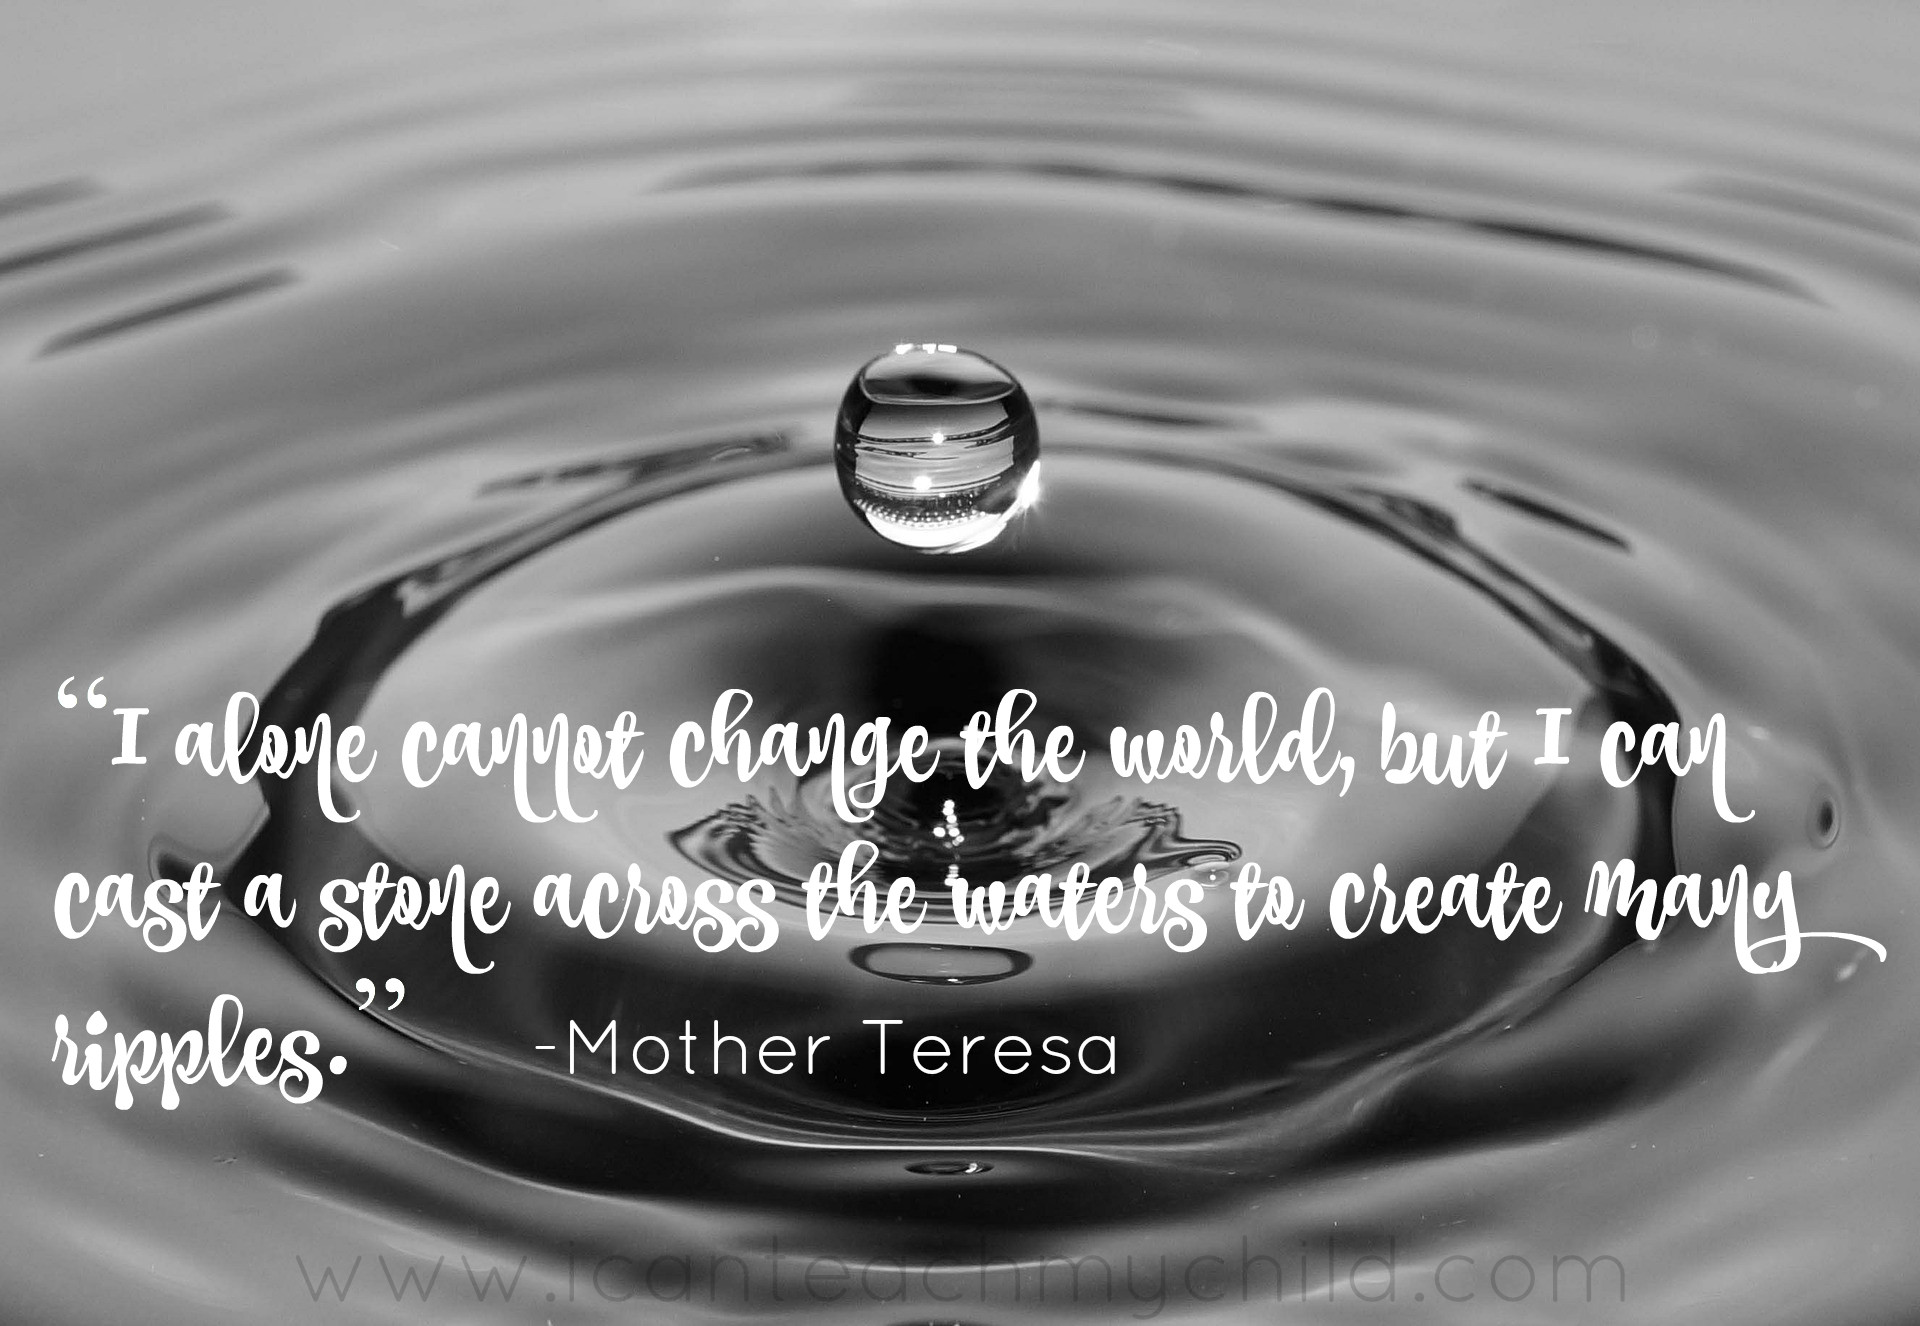 Mother Teresa Ripple Quote
 My Favorite Quotes by Mother Teresa Paintbrushes & Popsicles